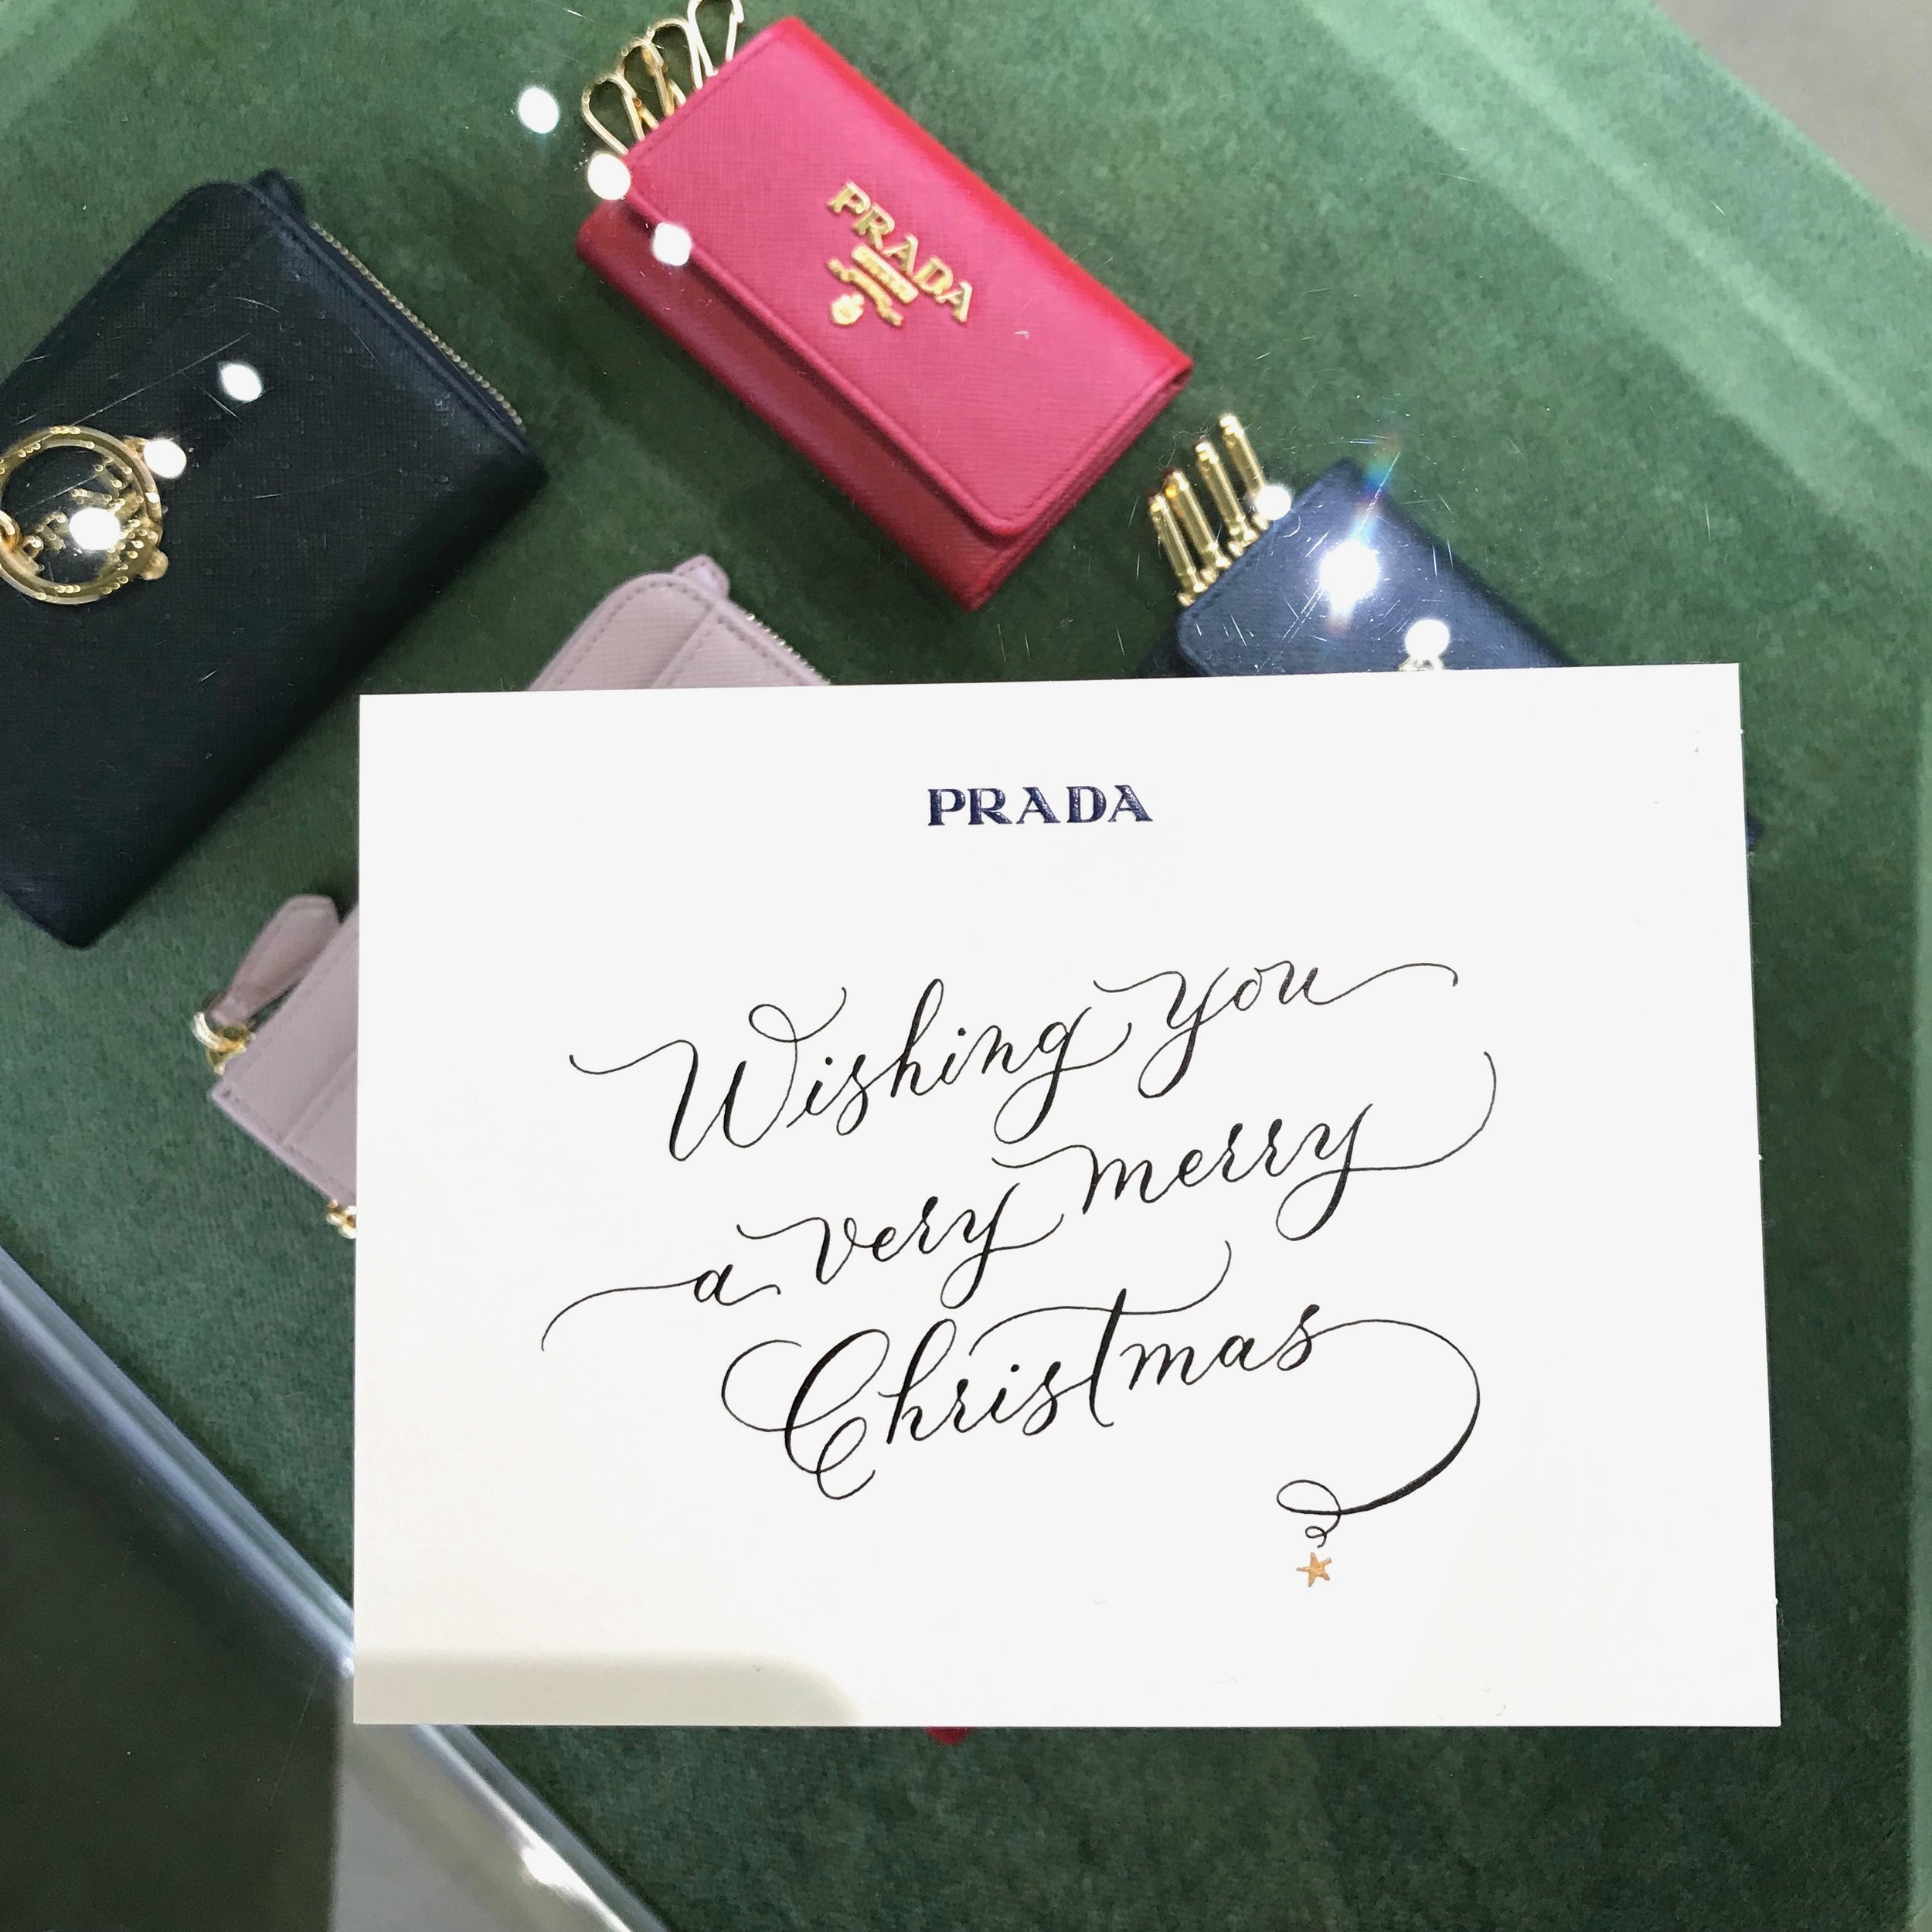 Personalized holiday cards - Prada (SCP)